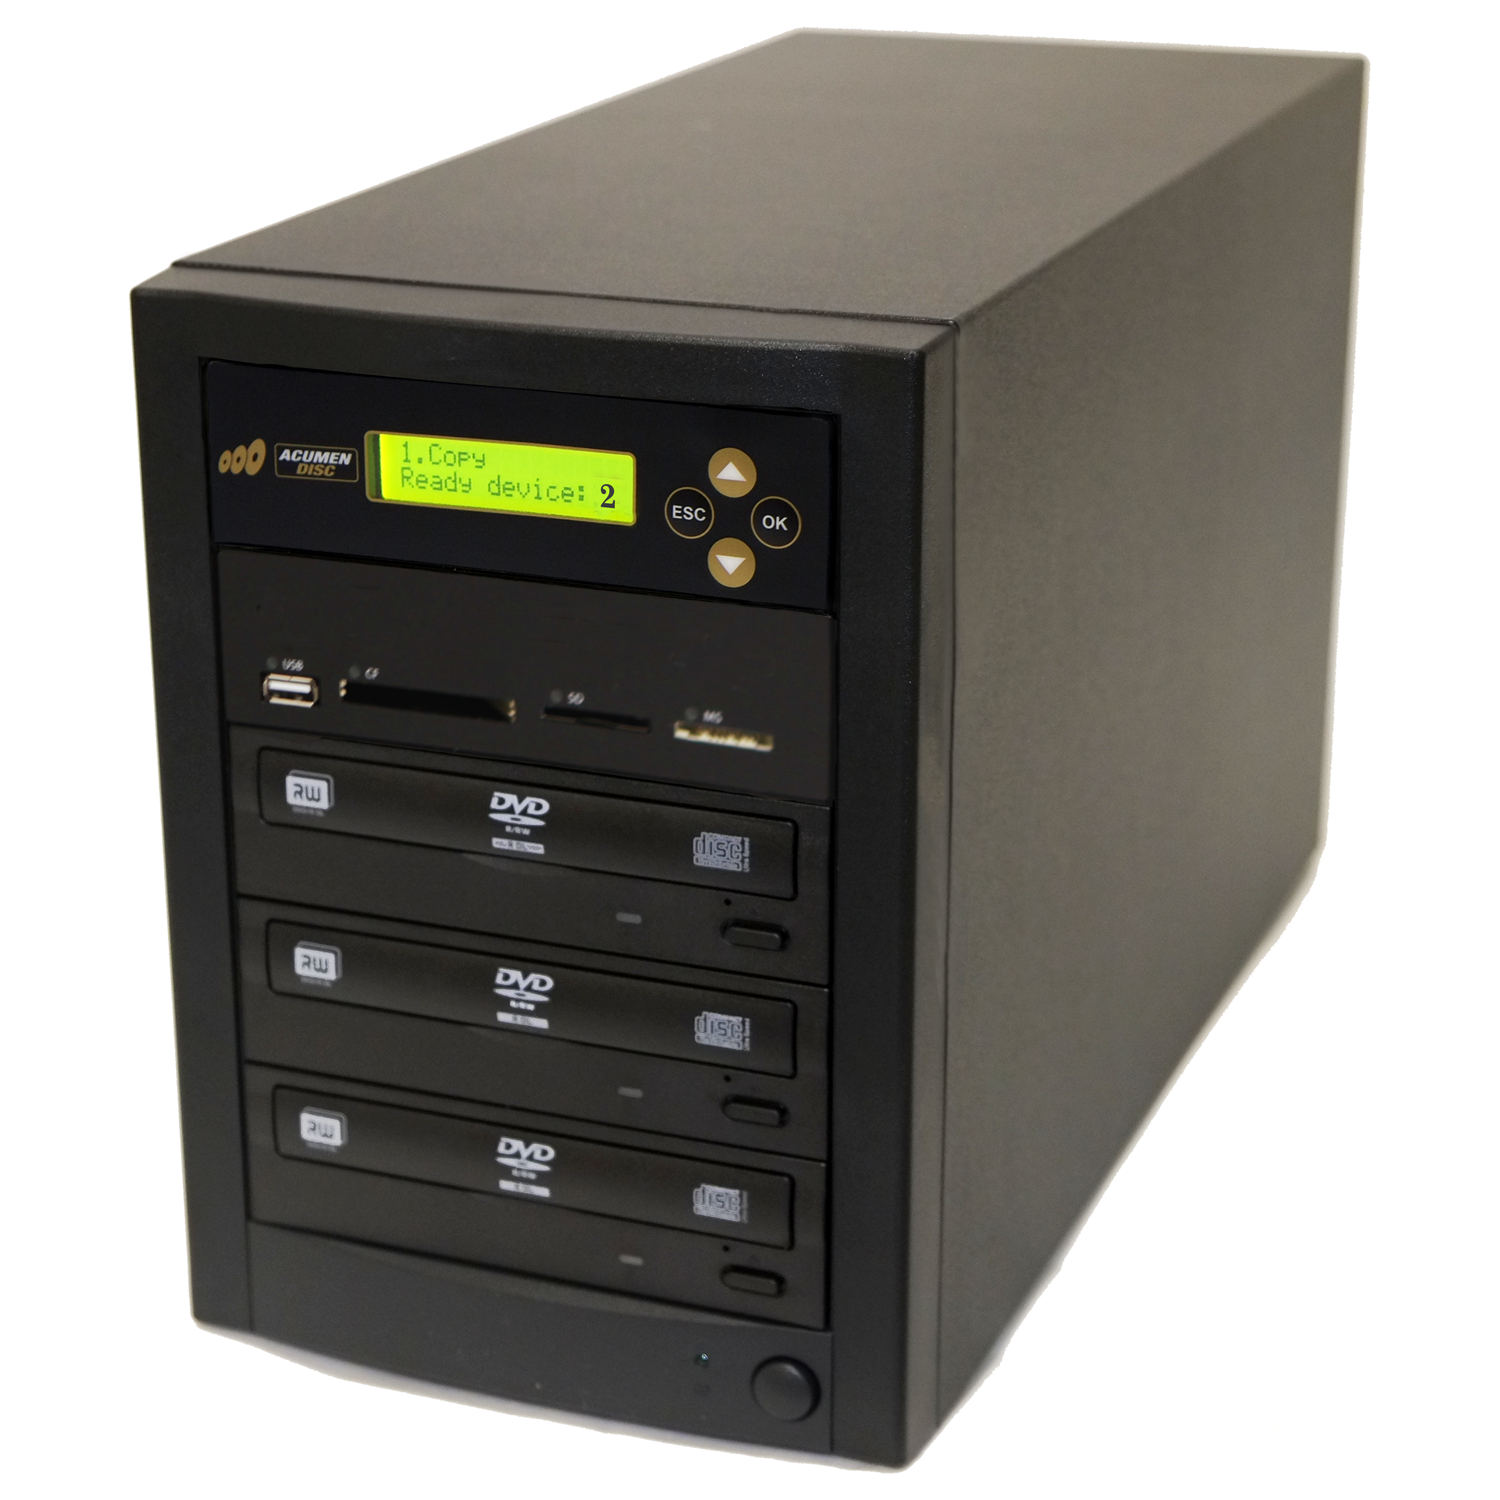 Acumen Disc 1 to 2 Flash Media (CF / SD / USB / MMS) to Multiple (DVD/CD) Discs Copier Duplicator Tower System - image 1 of 7